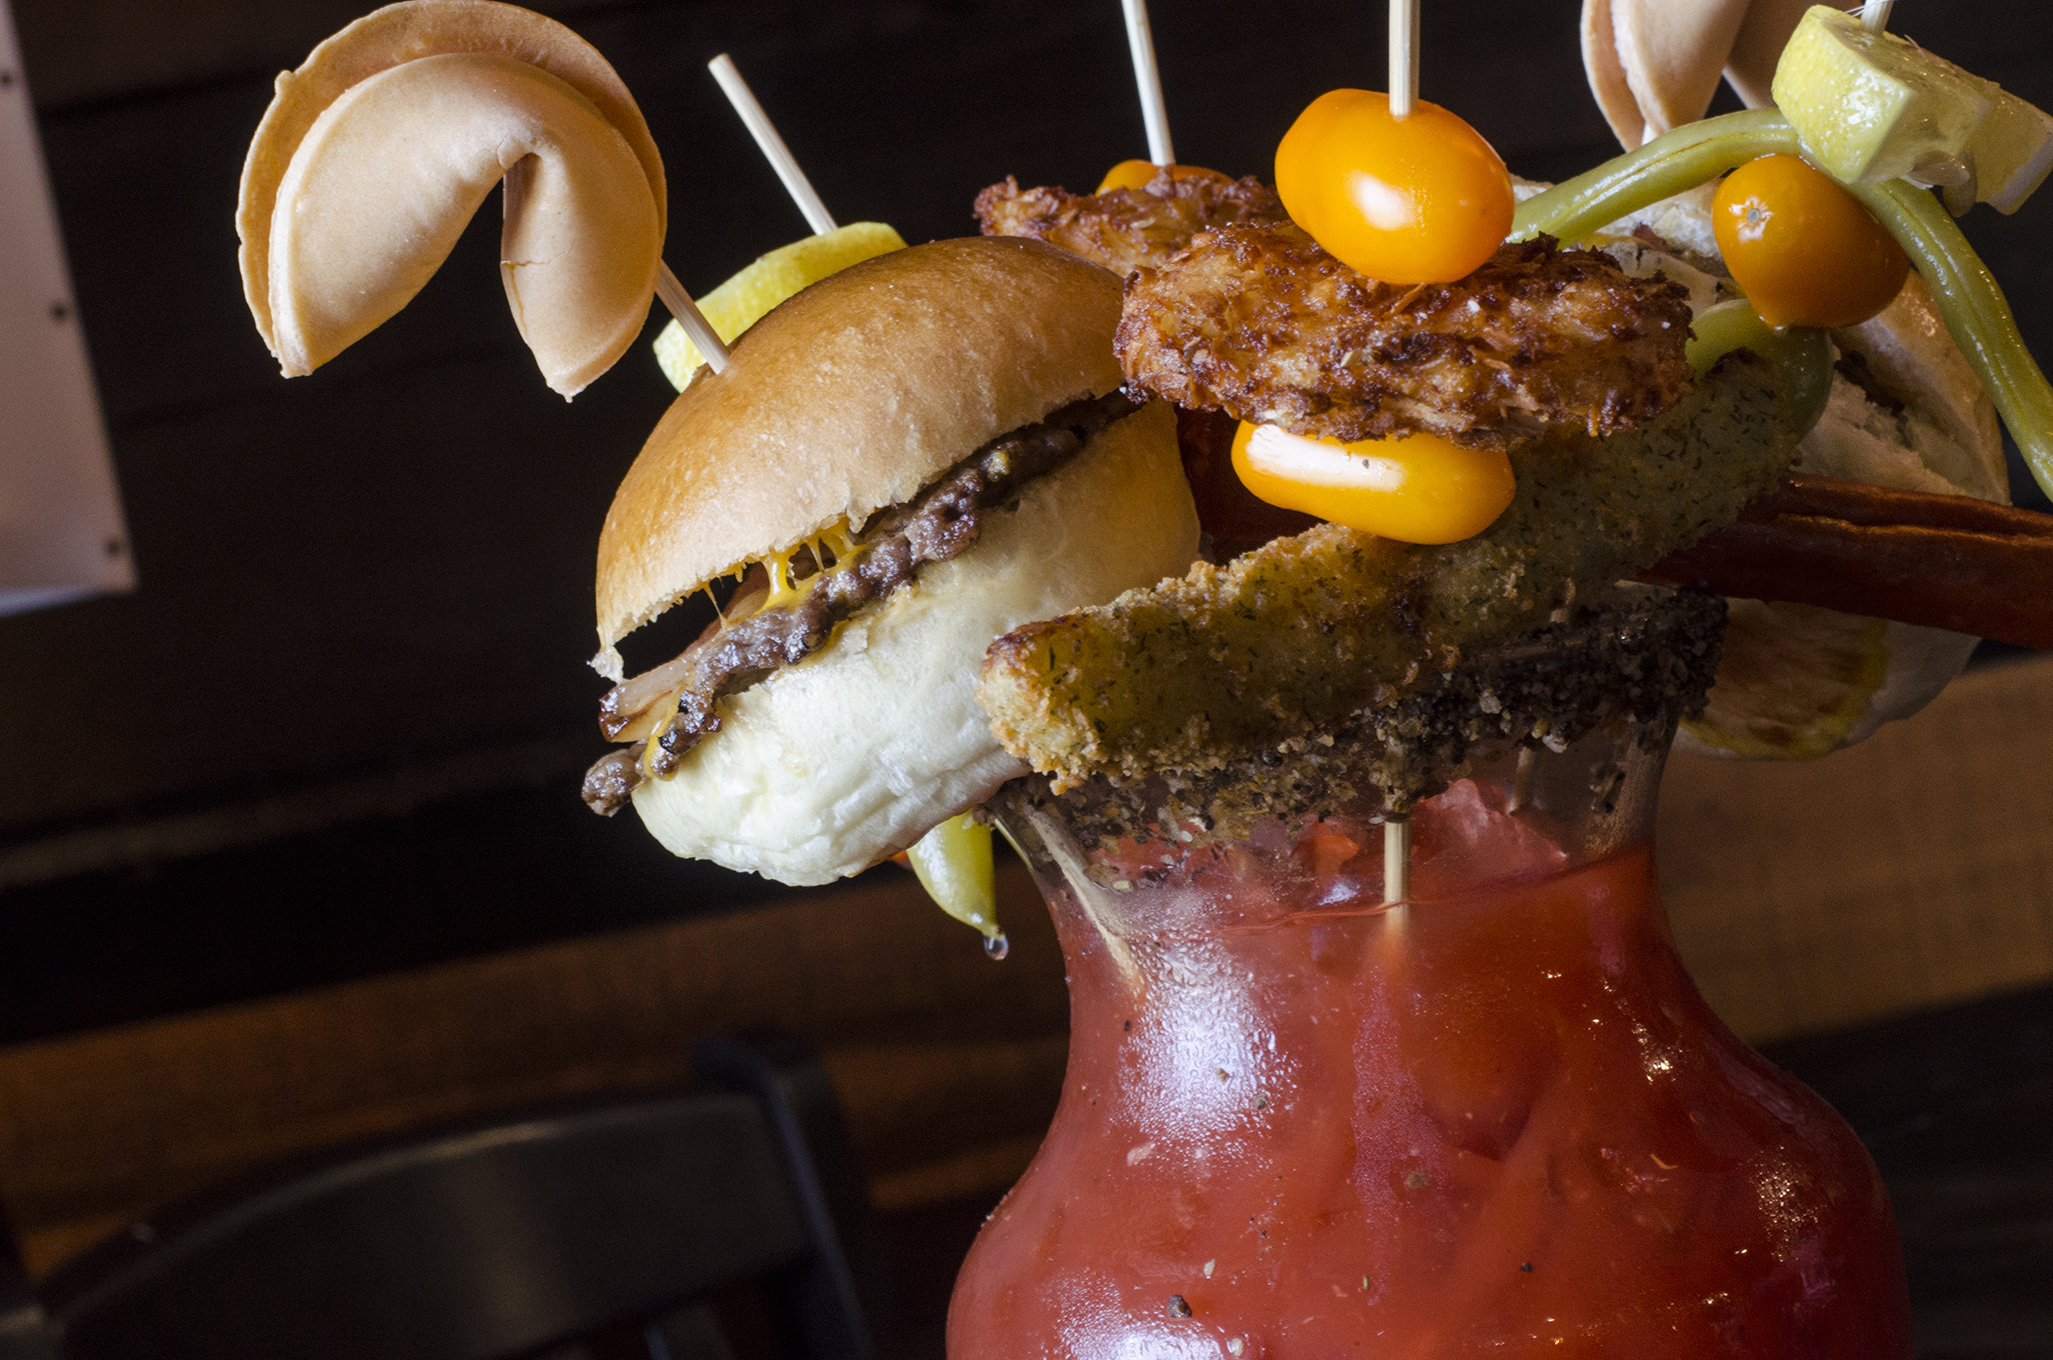 The Ridiculous & Obnoxious Caesar for Two at Walkerville Eatery in Windsor, Ontario.